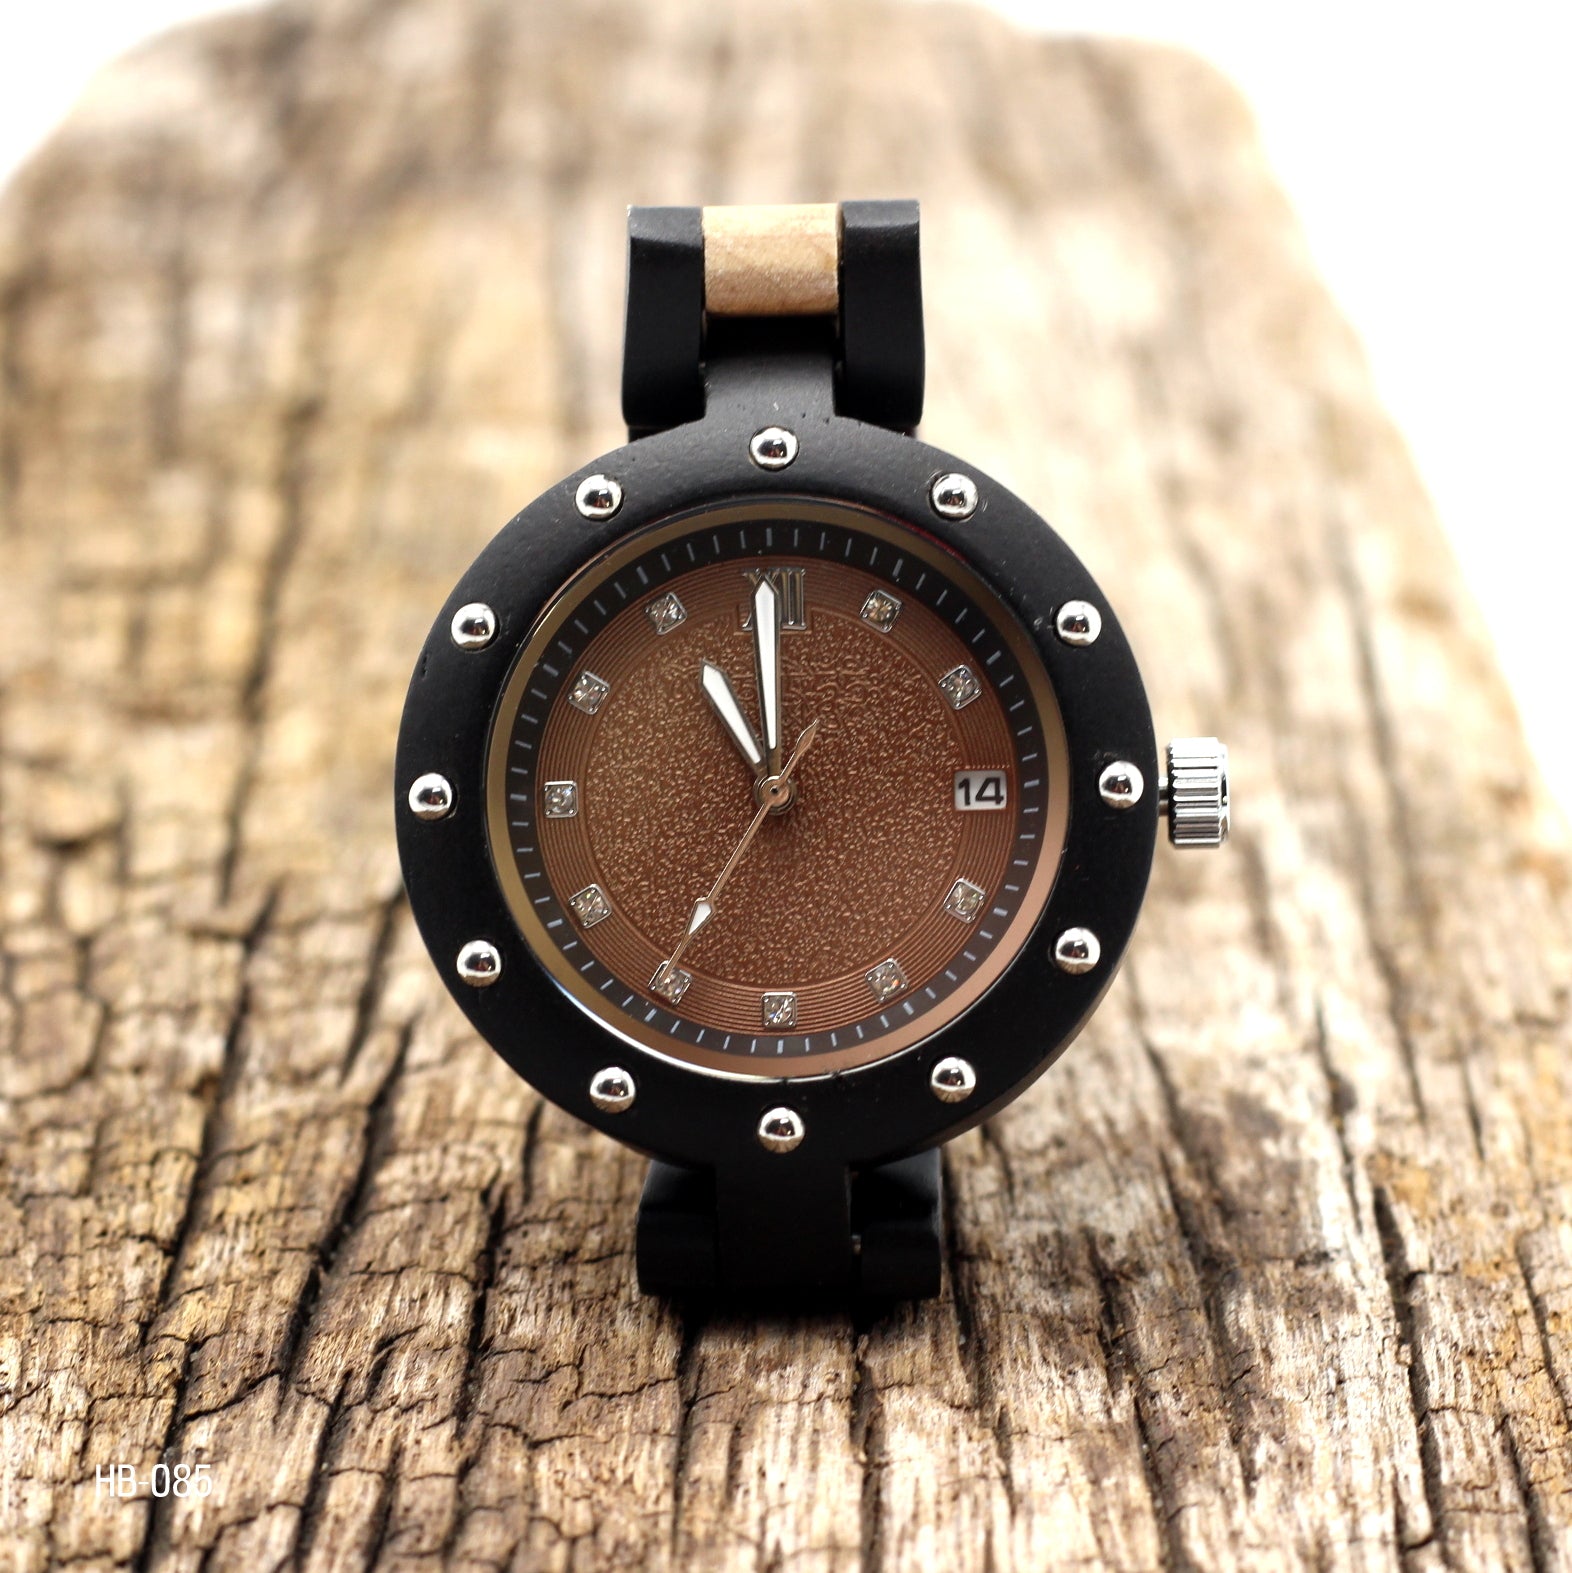 MISSDATE Ladies Solid Wooden Watch with DATE function - THE VERNE BLACK - Hashtag Bamboo